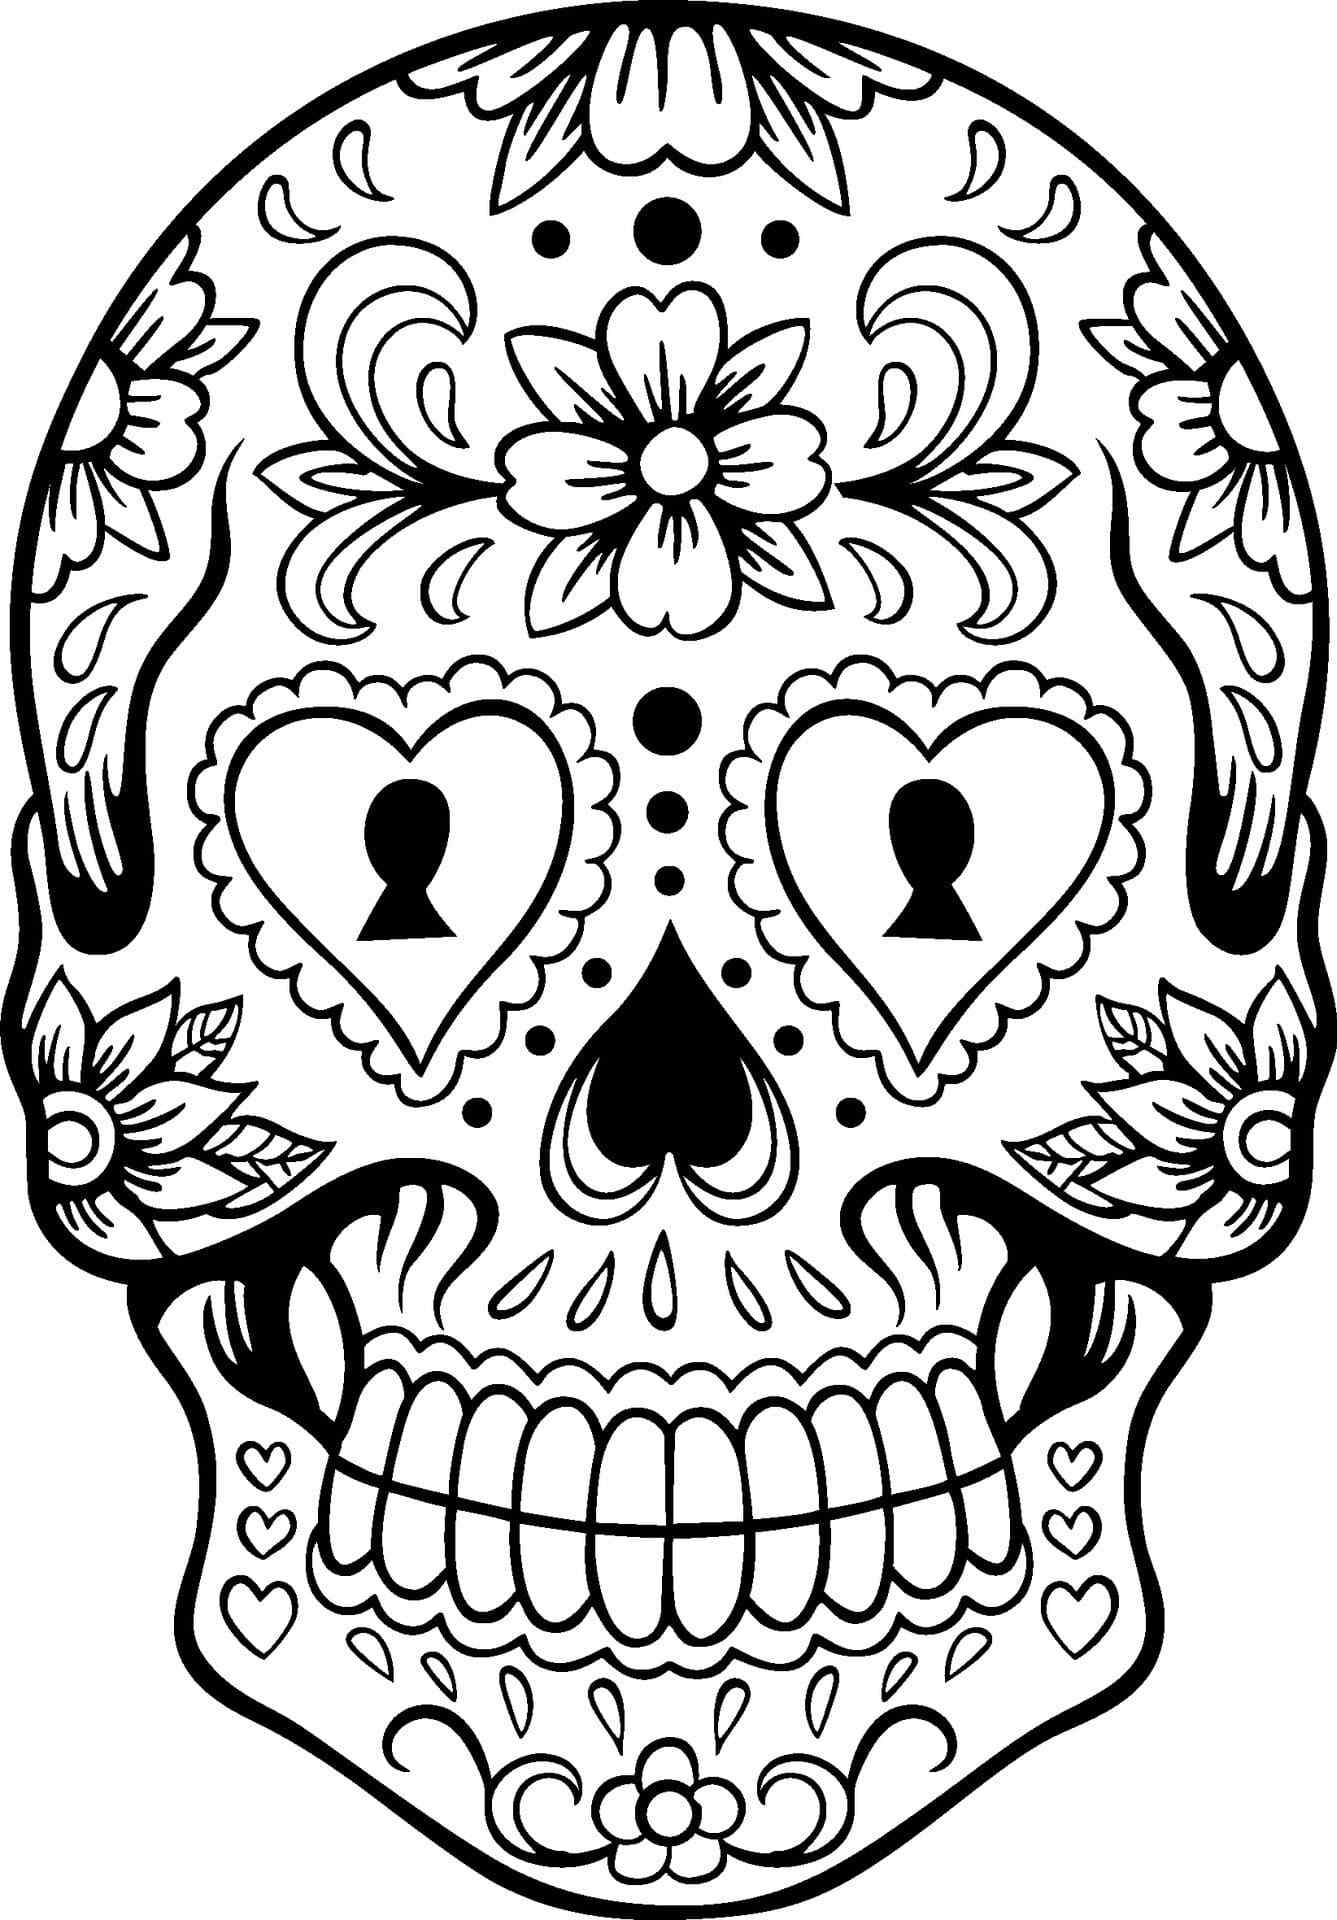 New Floral Ornament On The Skull